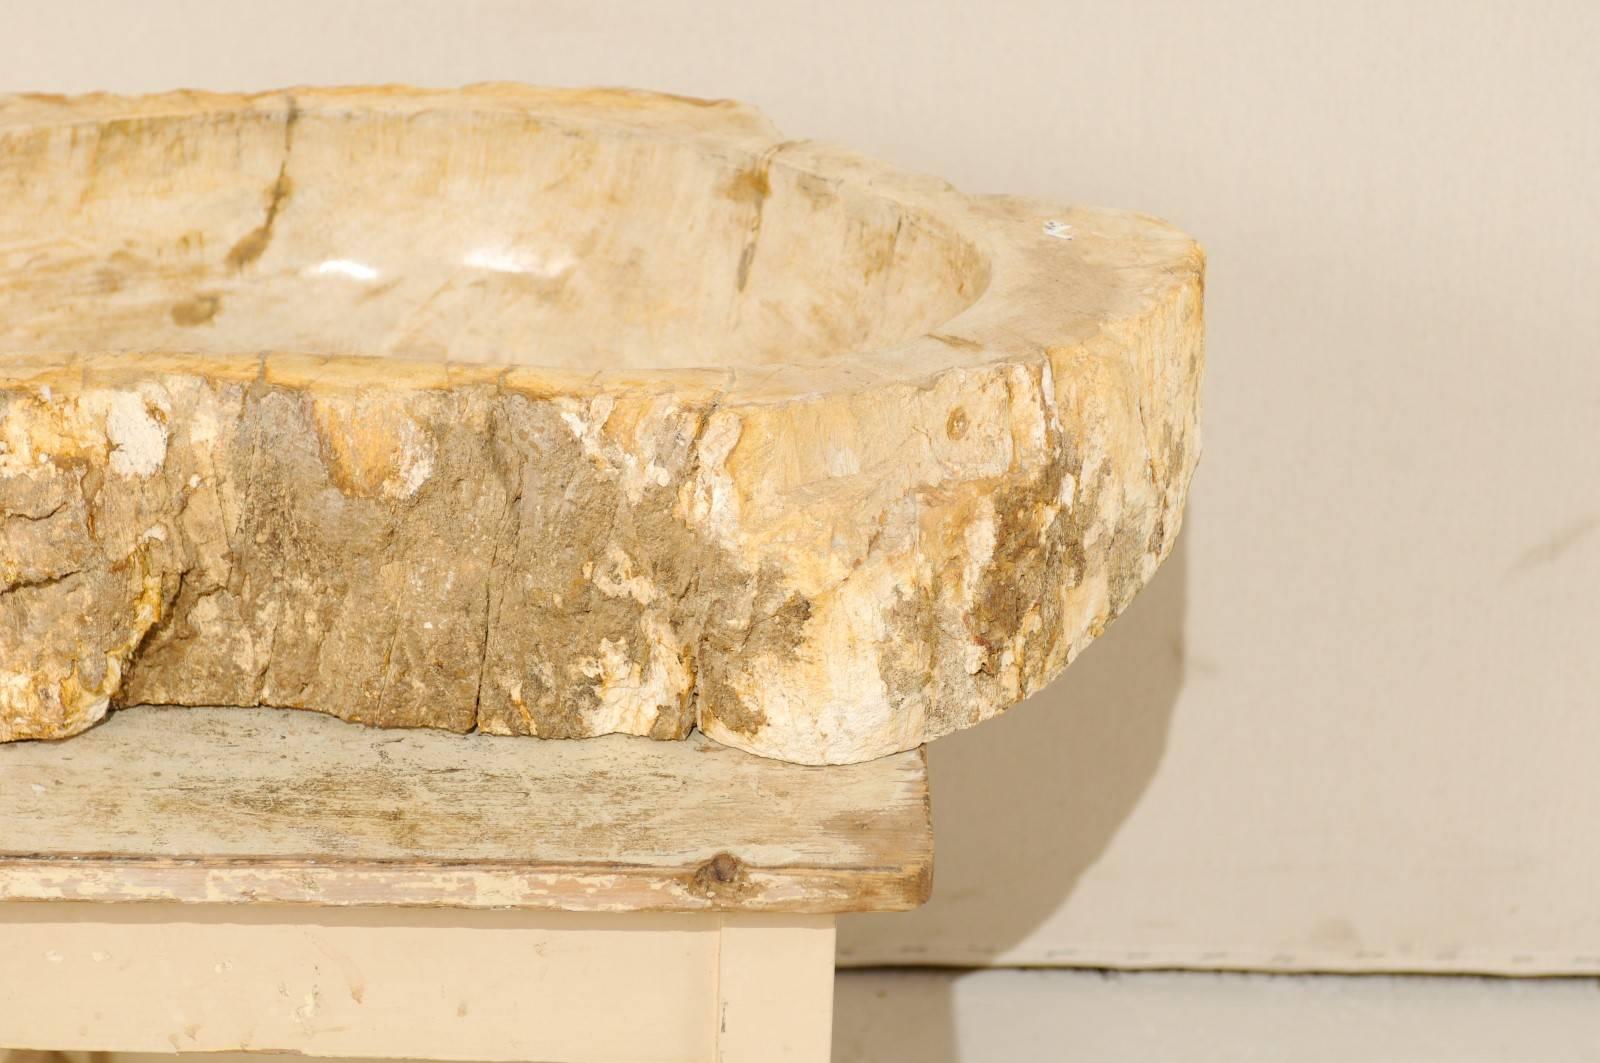 Polished Petrified Wood Sink with Rustic Oblong Shape in Warm Cream & Beige 3